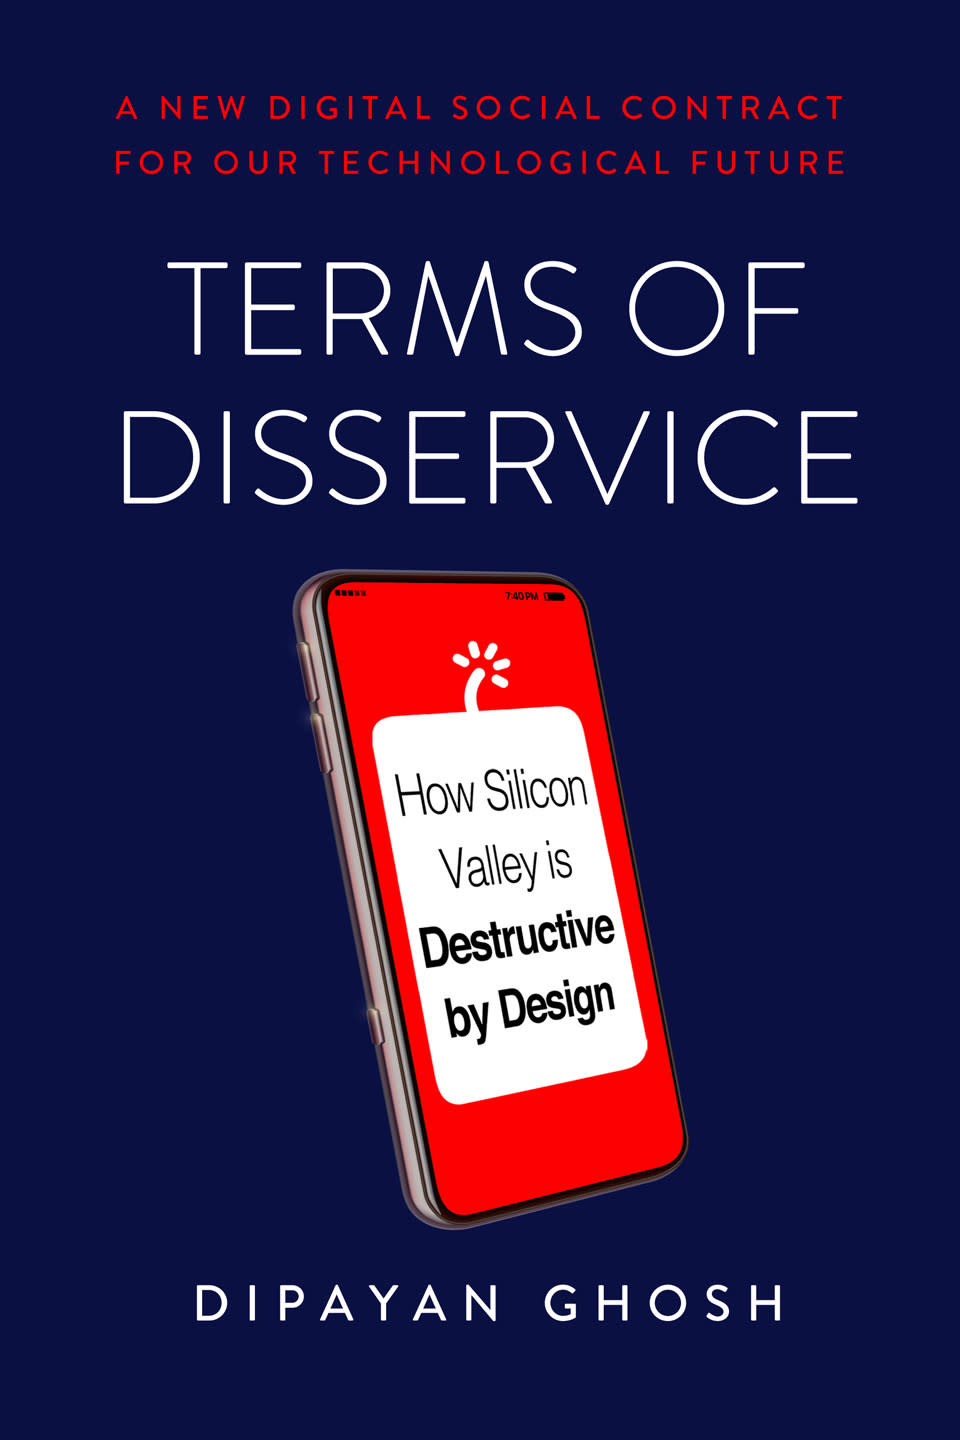 Cover of Terms of Disservice: How Silicon Valley is Destructive by Design by Dipayan Ghosh.